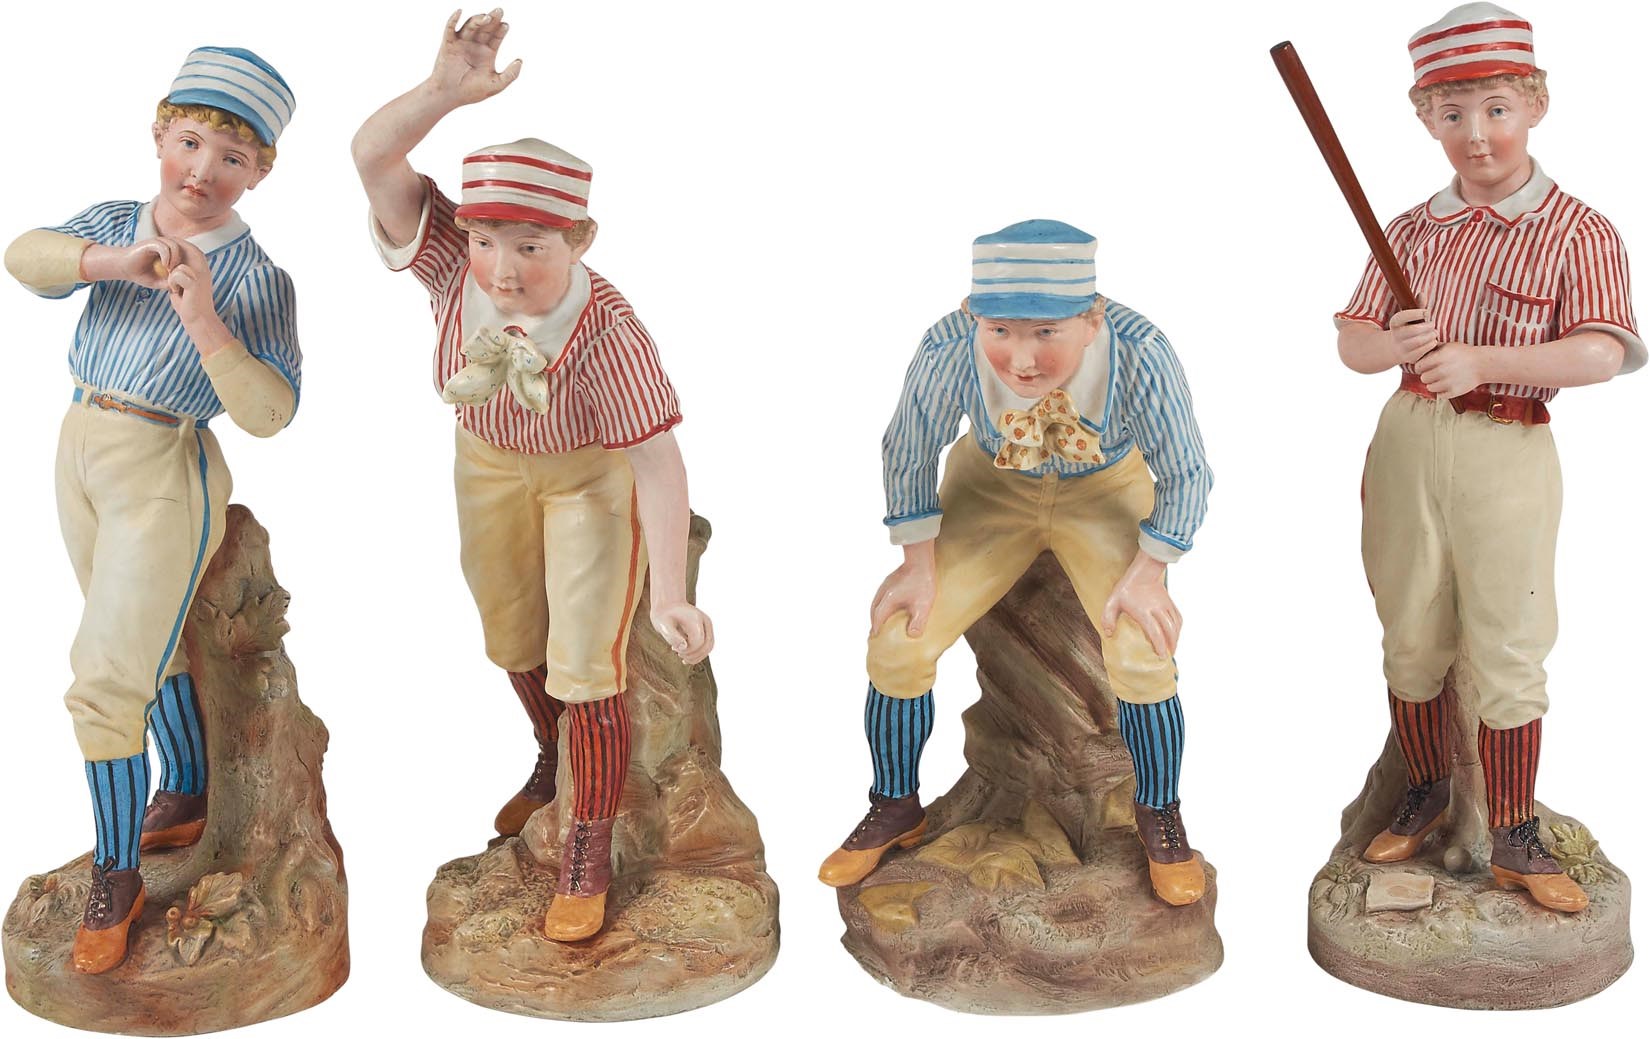 Early Baseball - 1880s Heubach GIANT Baseball Bisque Figures (4) - Finest of the Two Known Sets